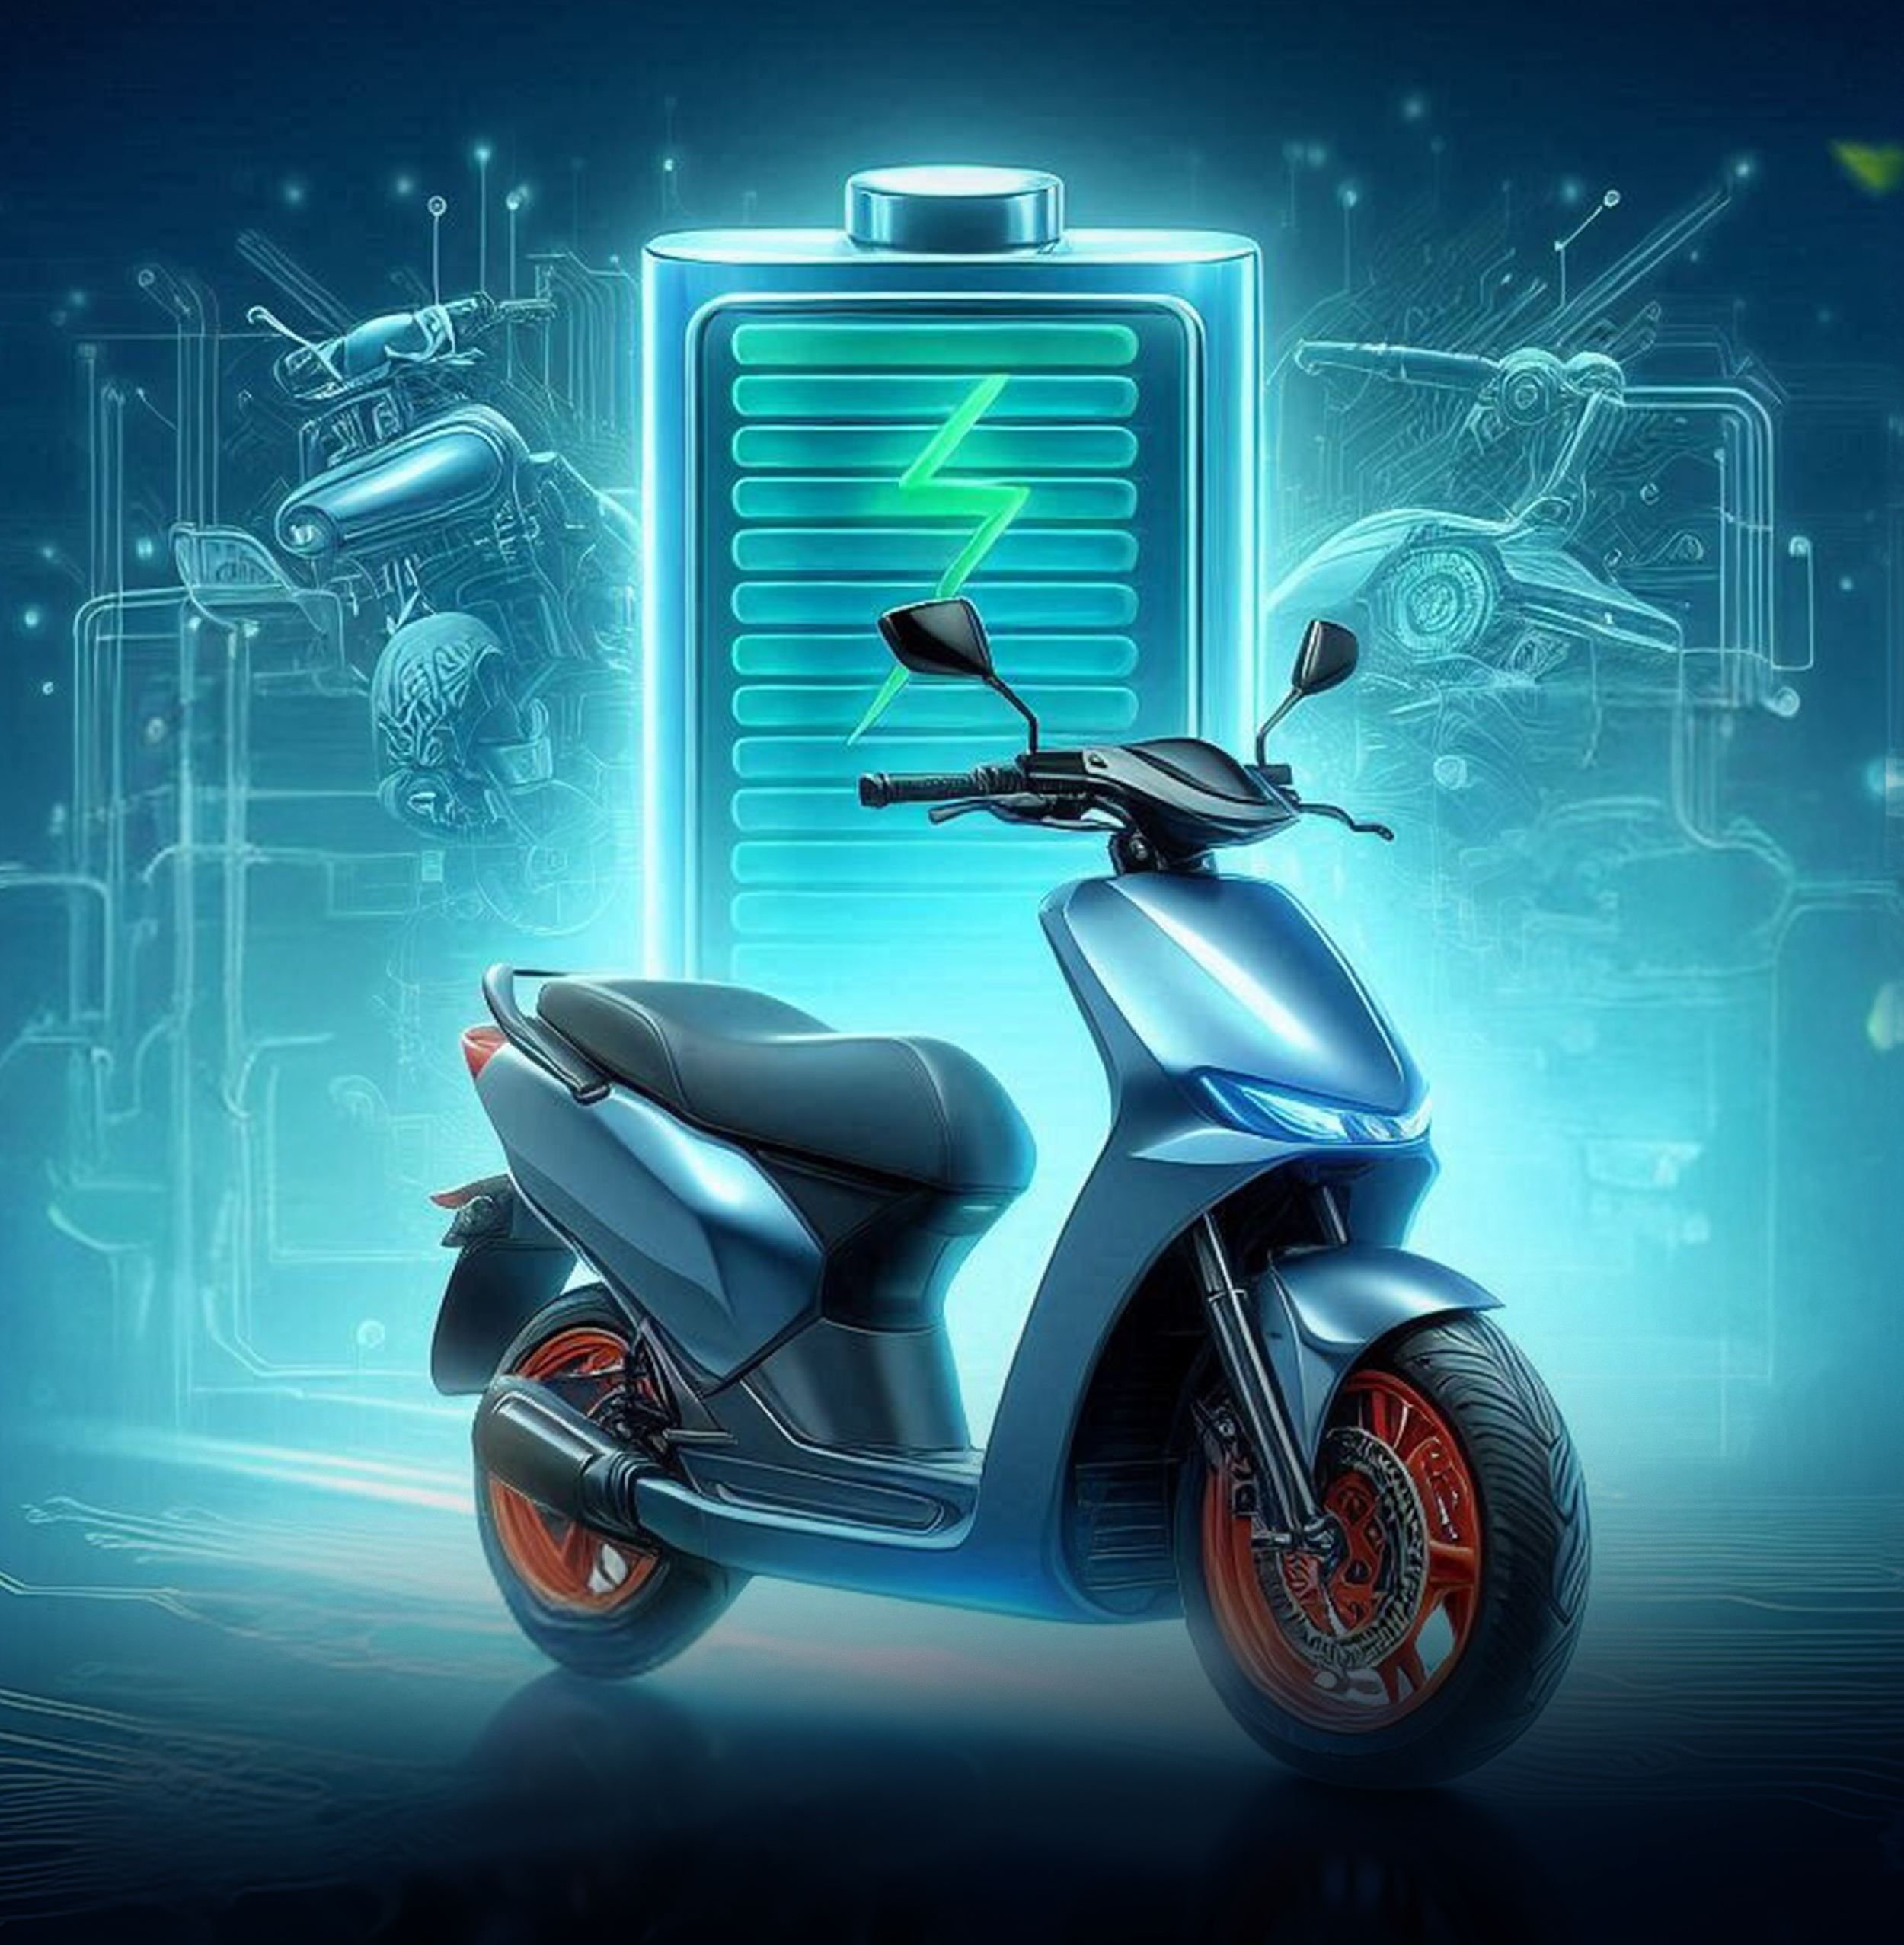 The Green Commute: How Lithium-ion Batteries are Revolutionizing Two-Wheeler Travel in India